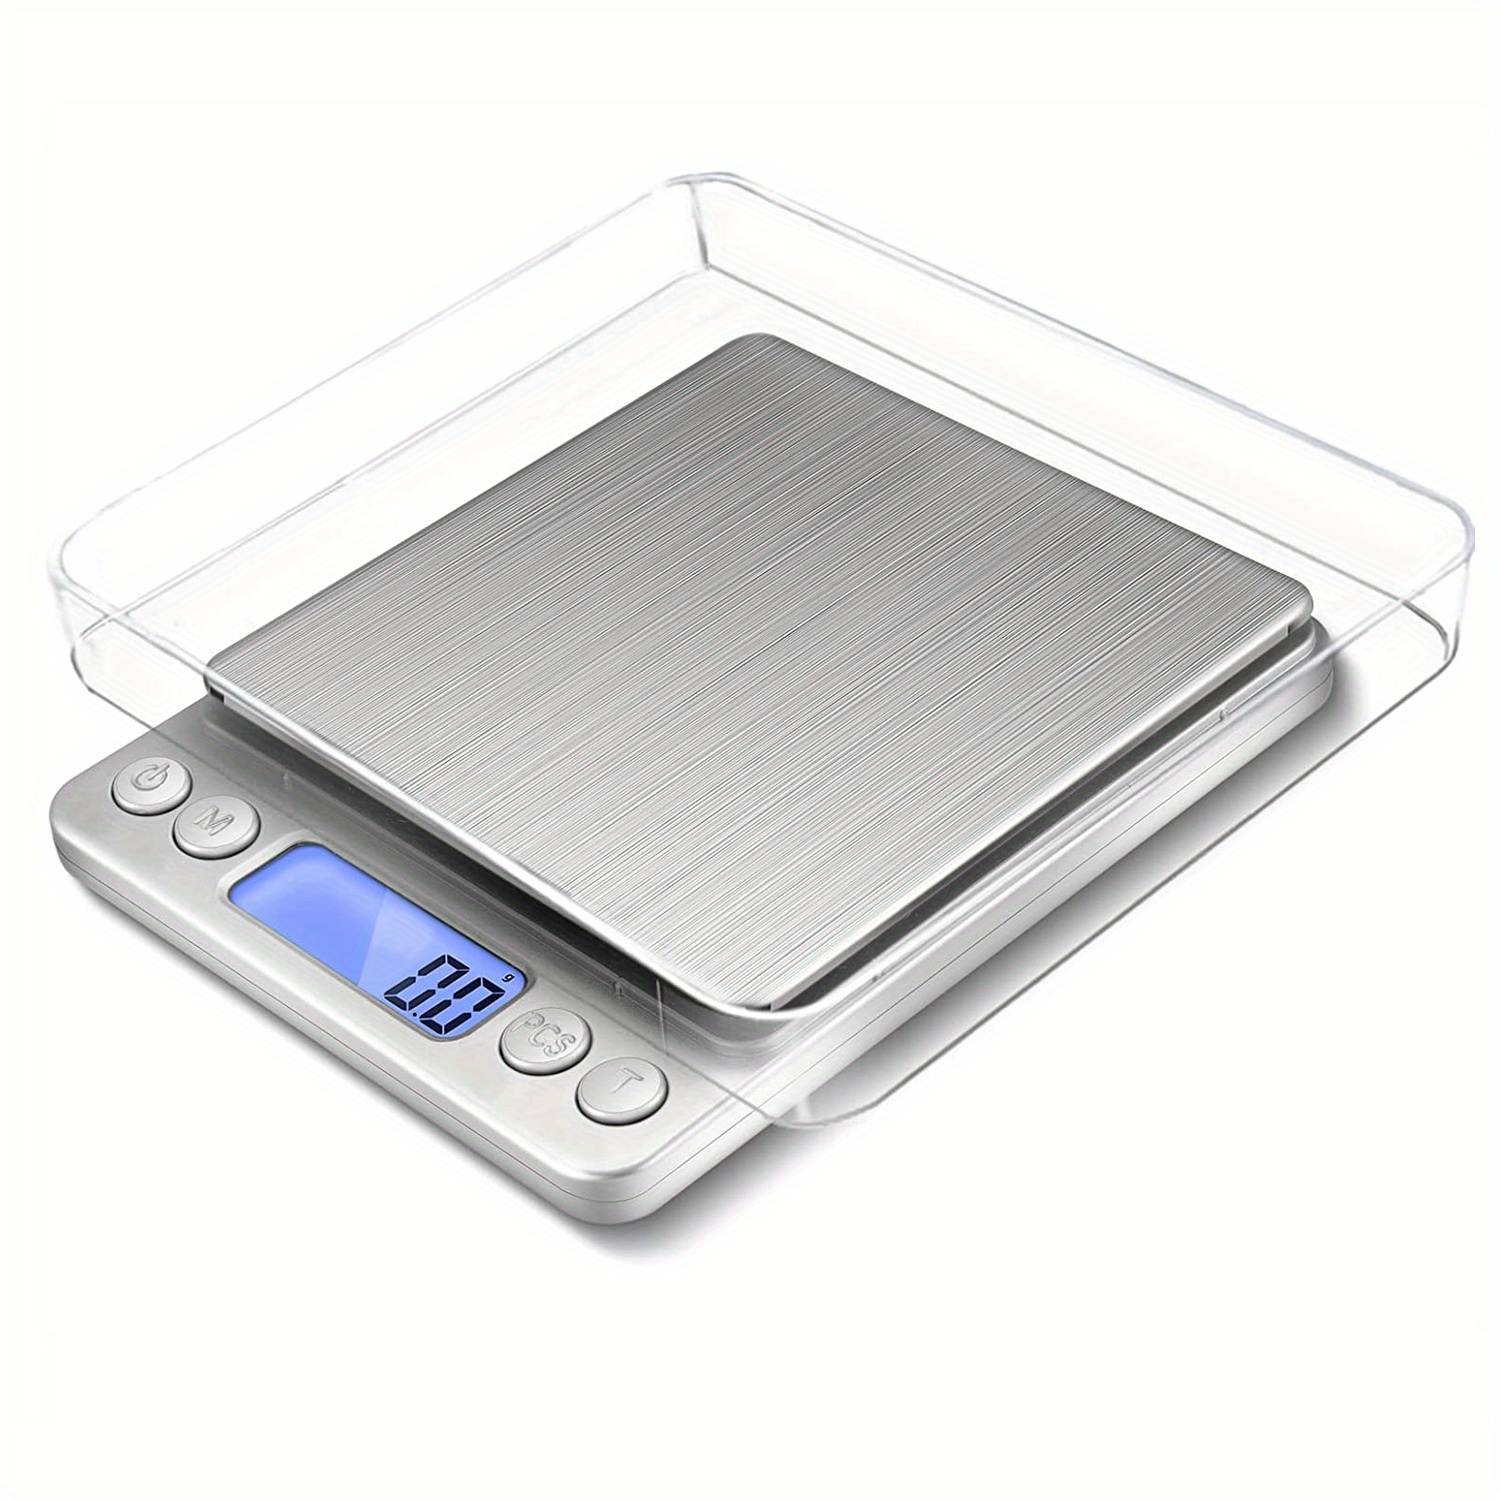 Cheap Digital Kitchen Scale 3000g/ 0.1g Small Jewelry Scale Food Scales  Digital Weight Gram and Oz Digital Gram Scale with LCD/ Tare